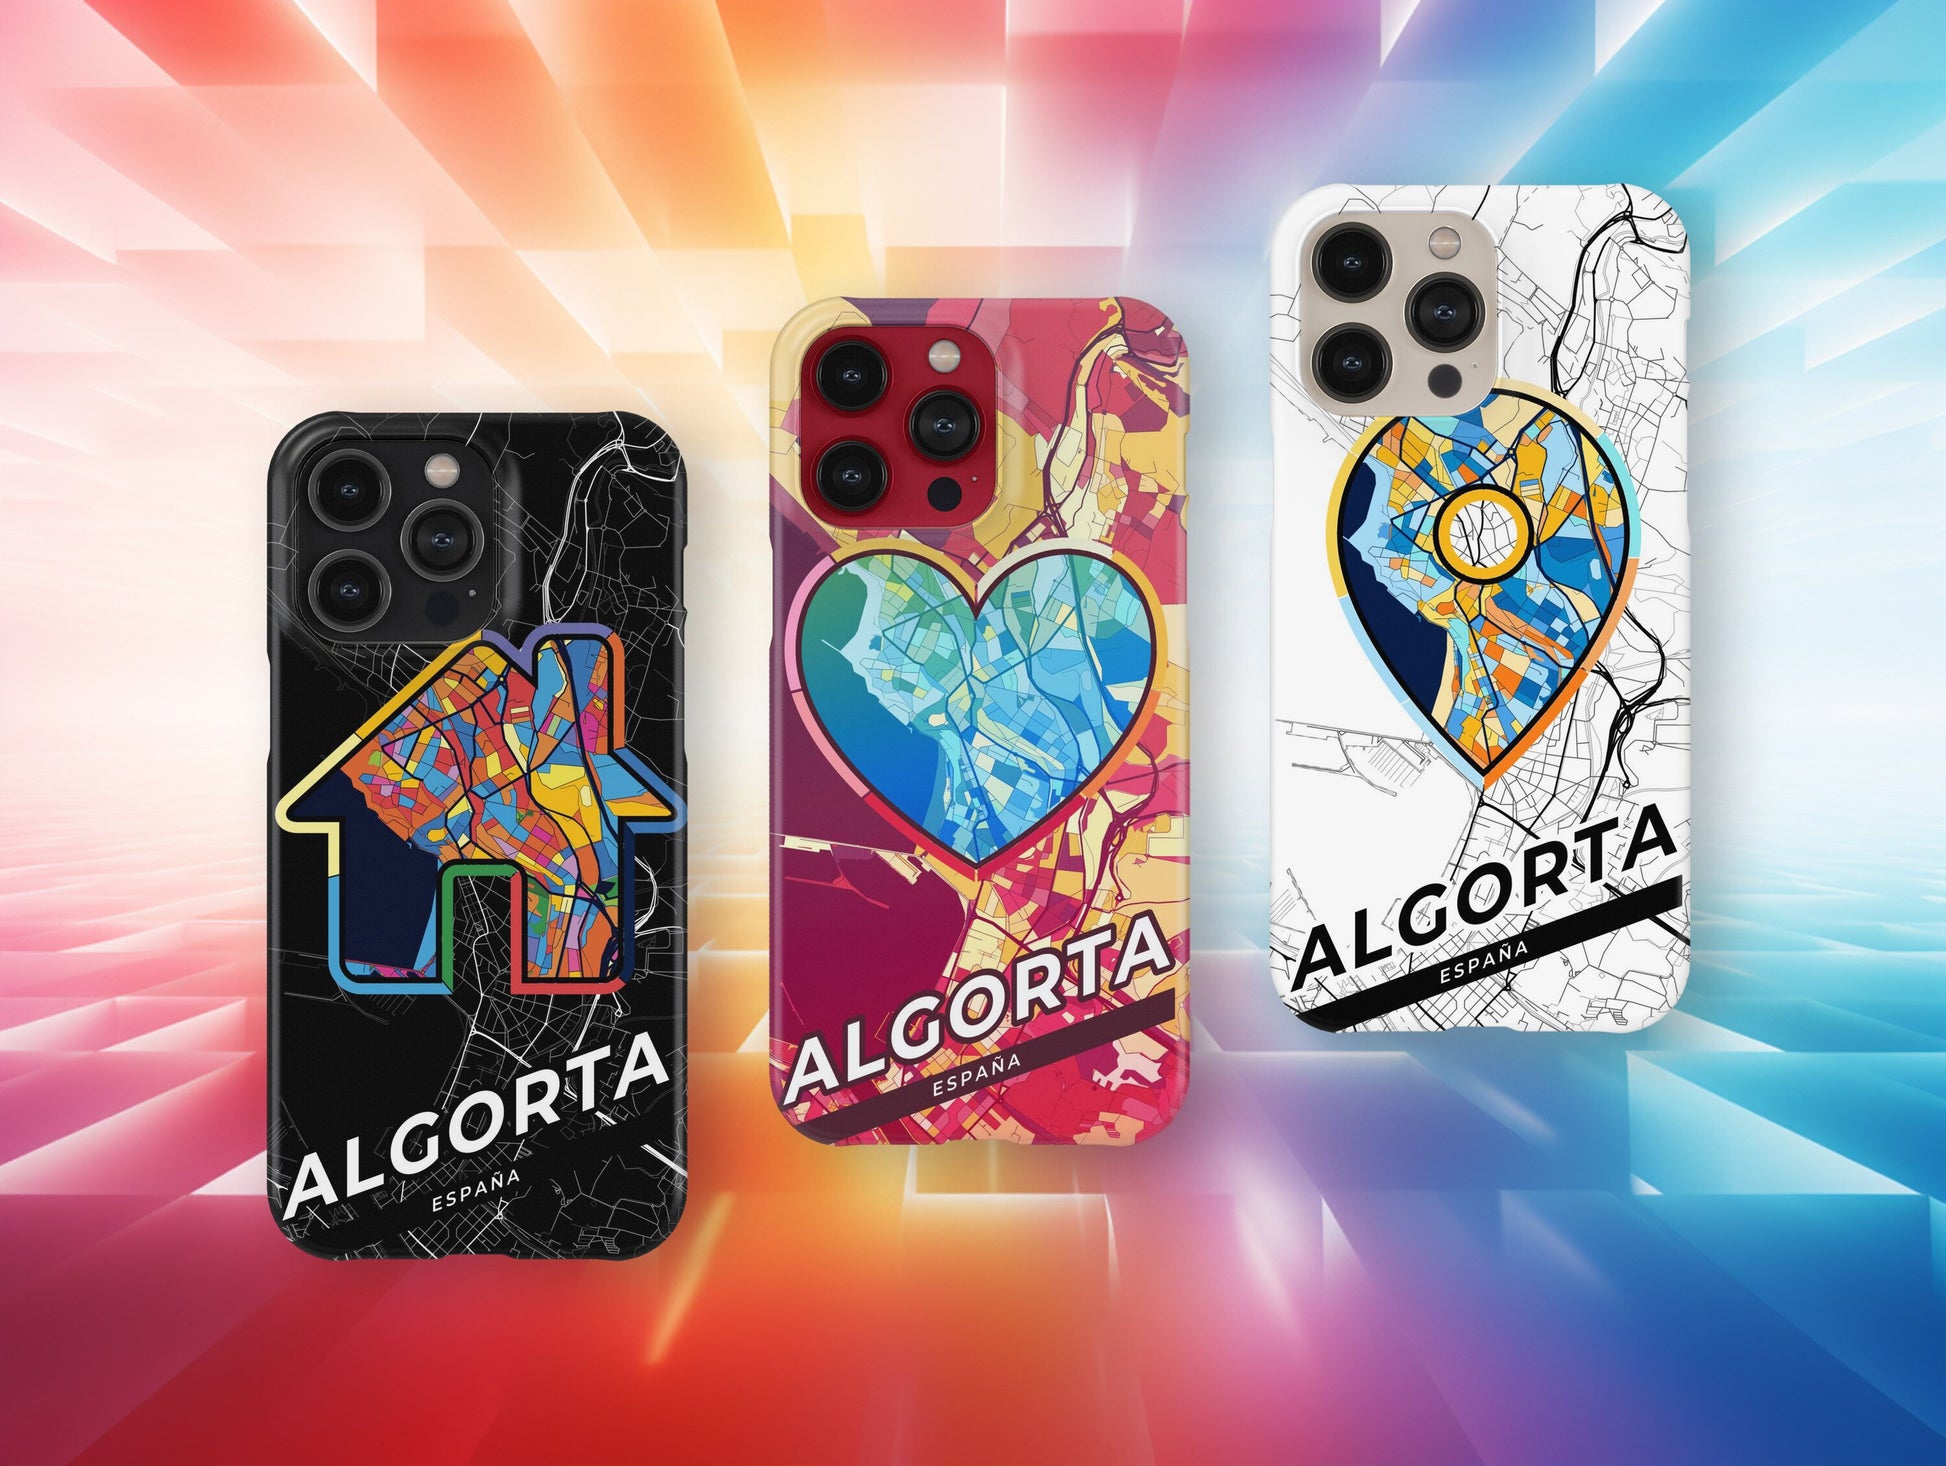 Algorta Spain slim phone case with colorful icon. Birthday, wedding or housewarming gift. Couple match cases.